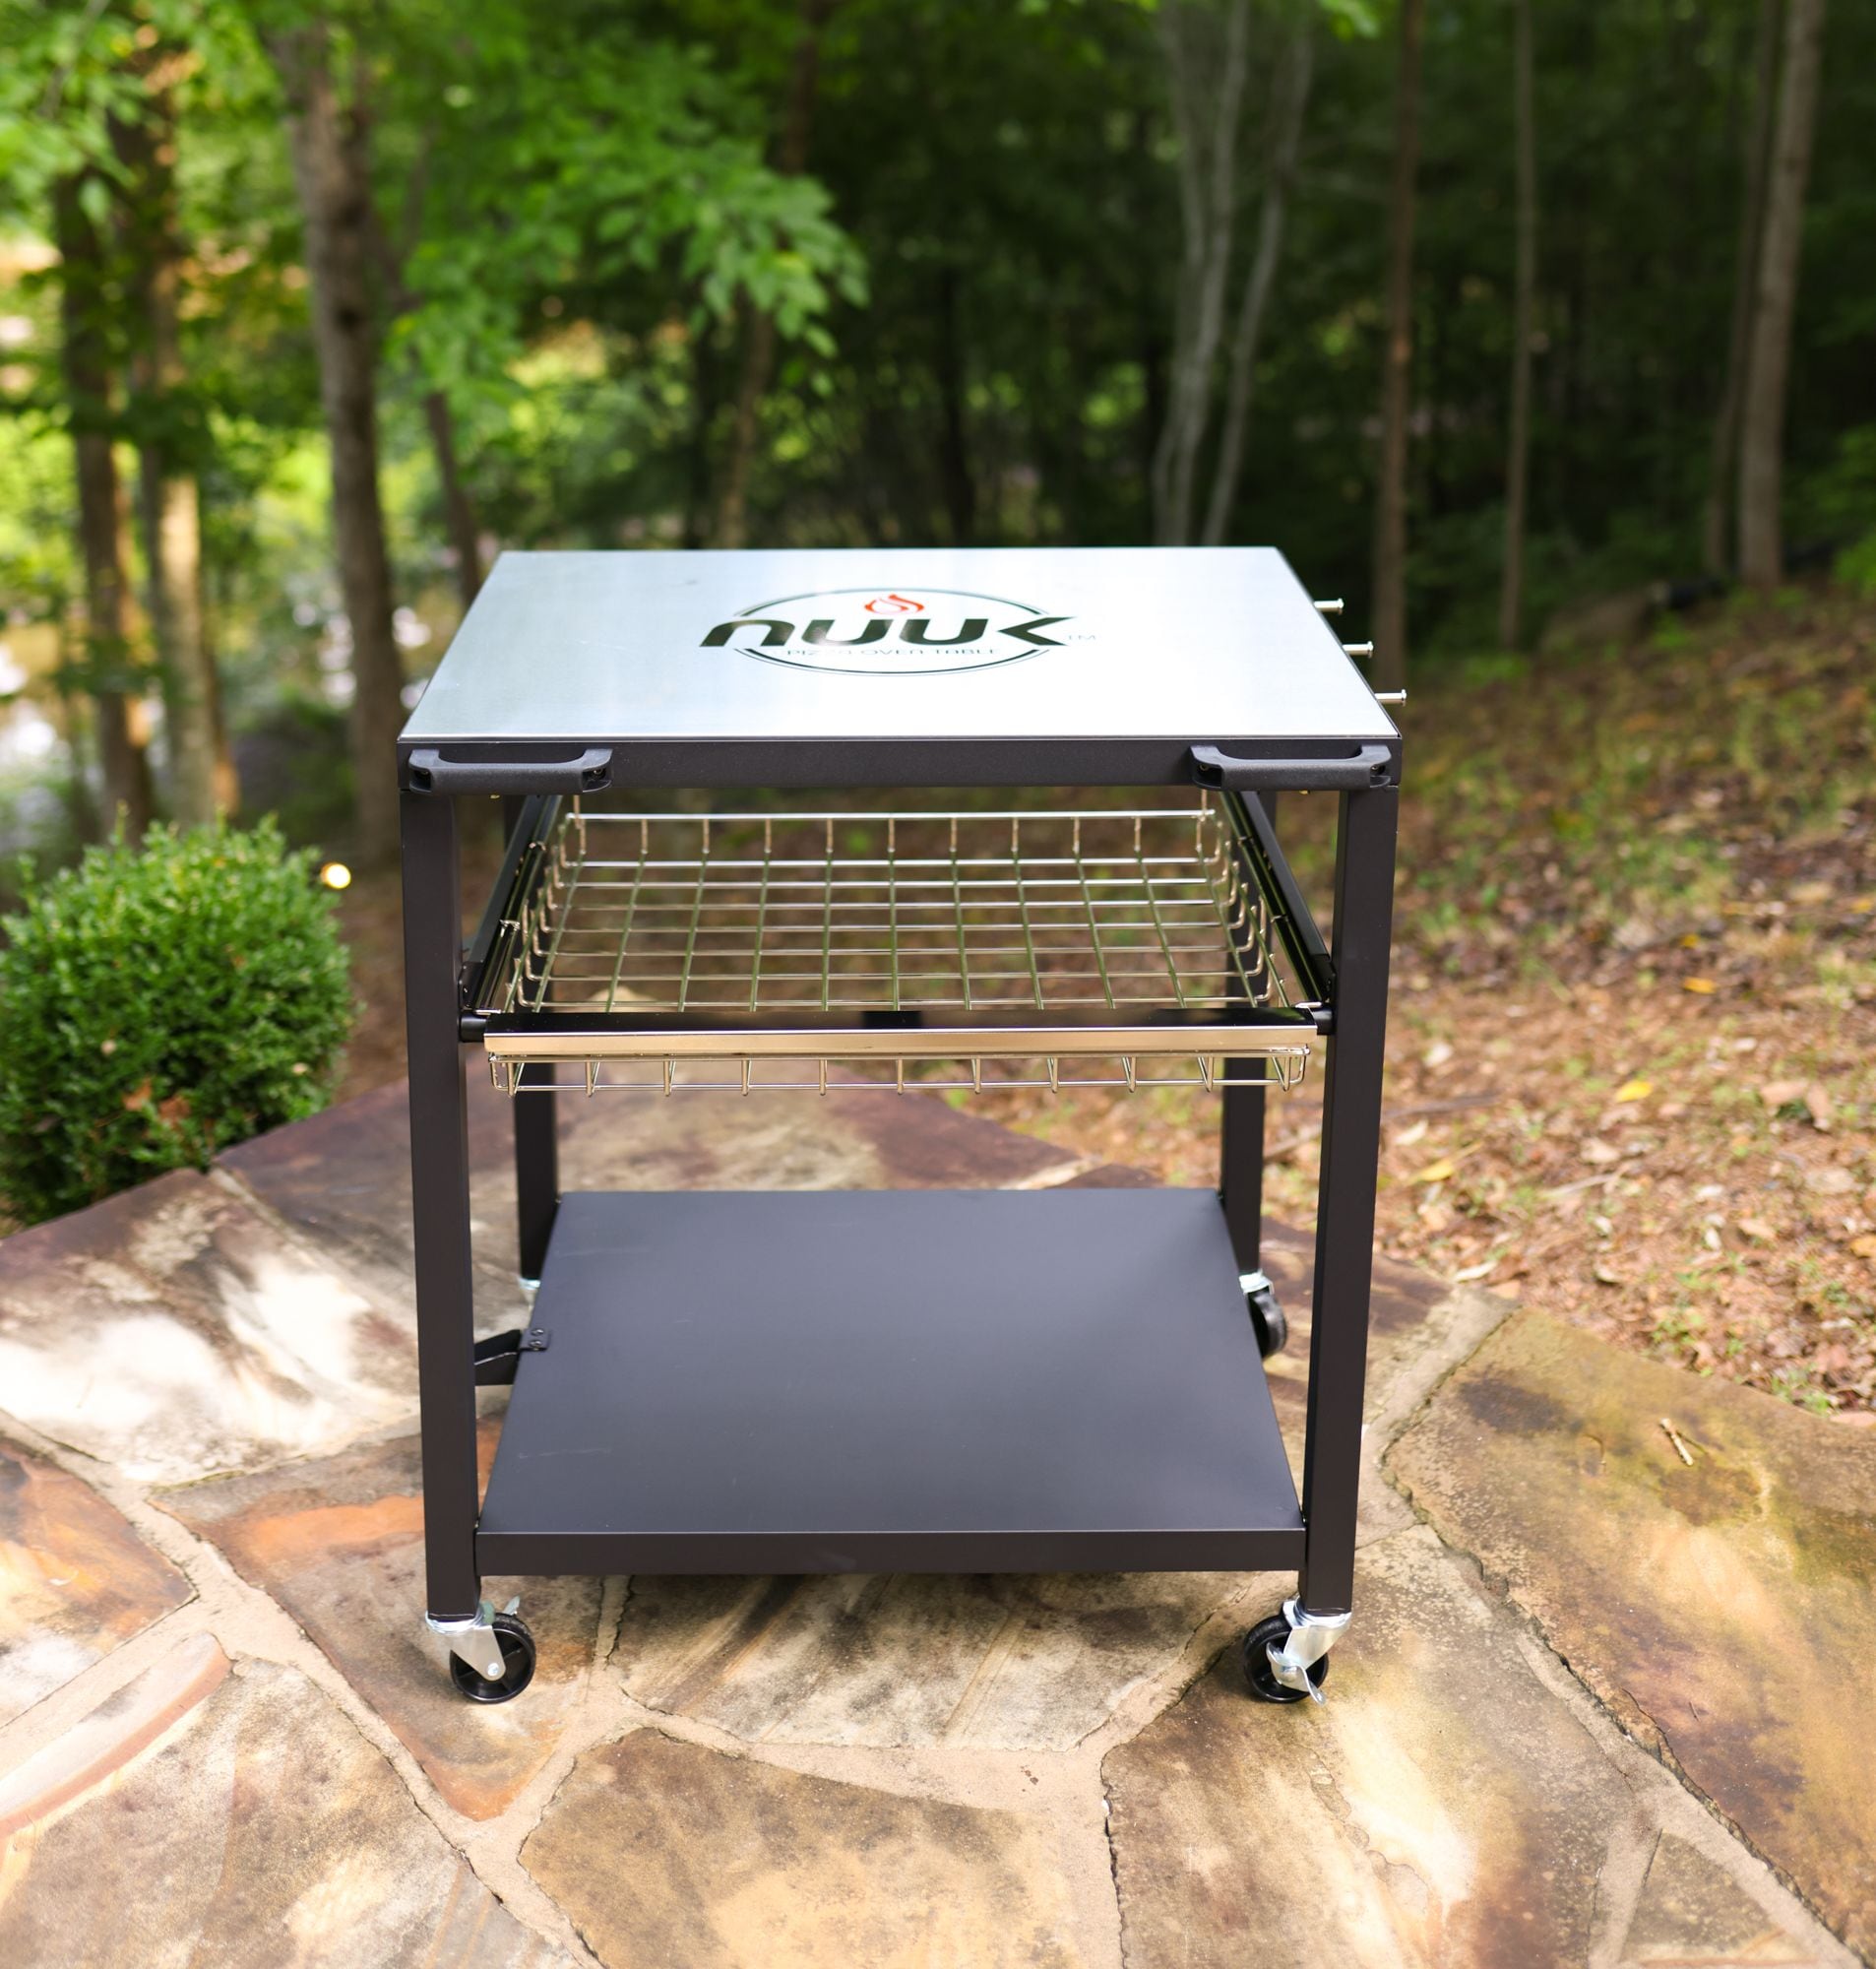 NUUK USA Grill Carts Steel NUUK & Grilling Stands at Tables Cart Grill the Grill in department